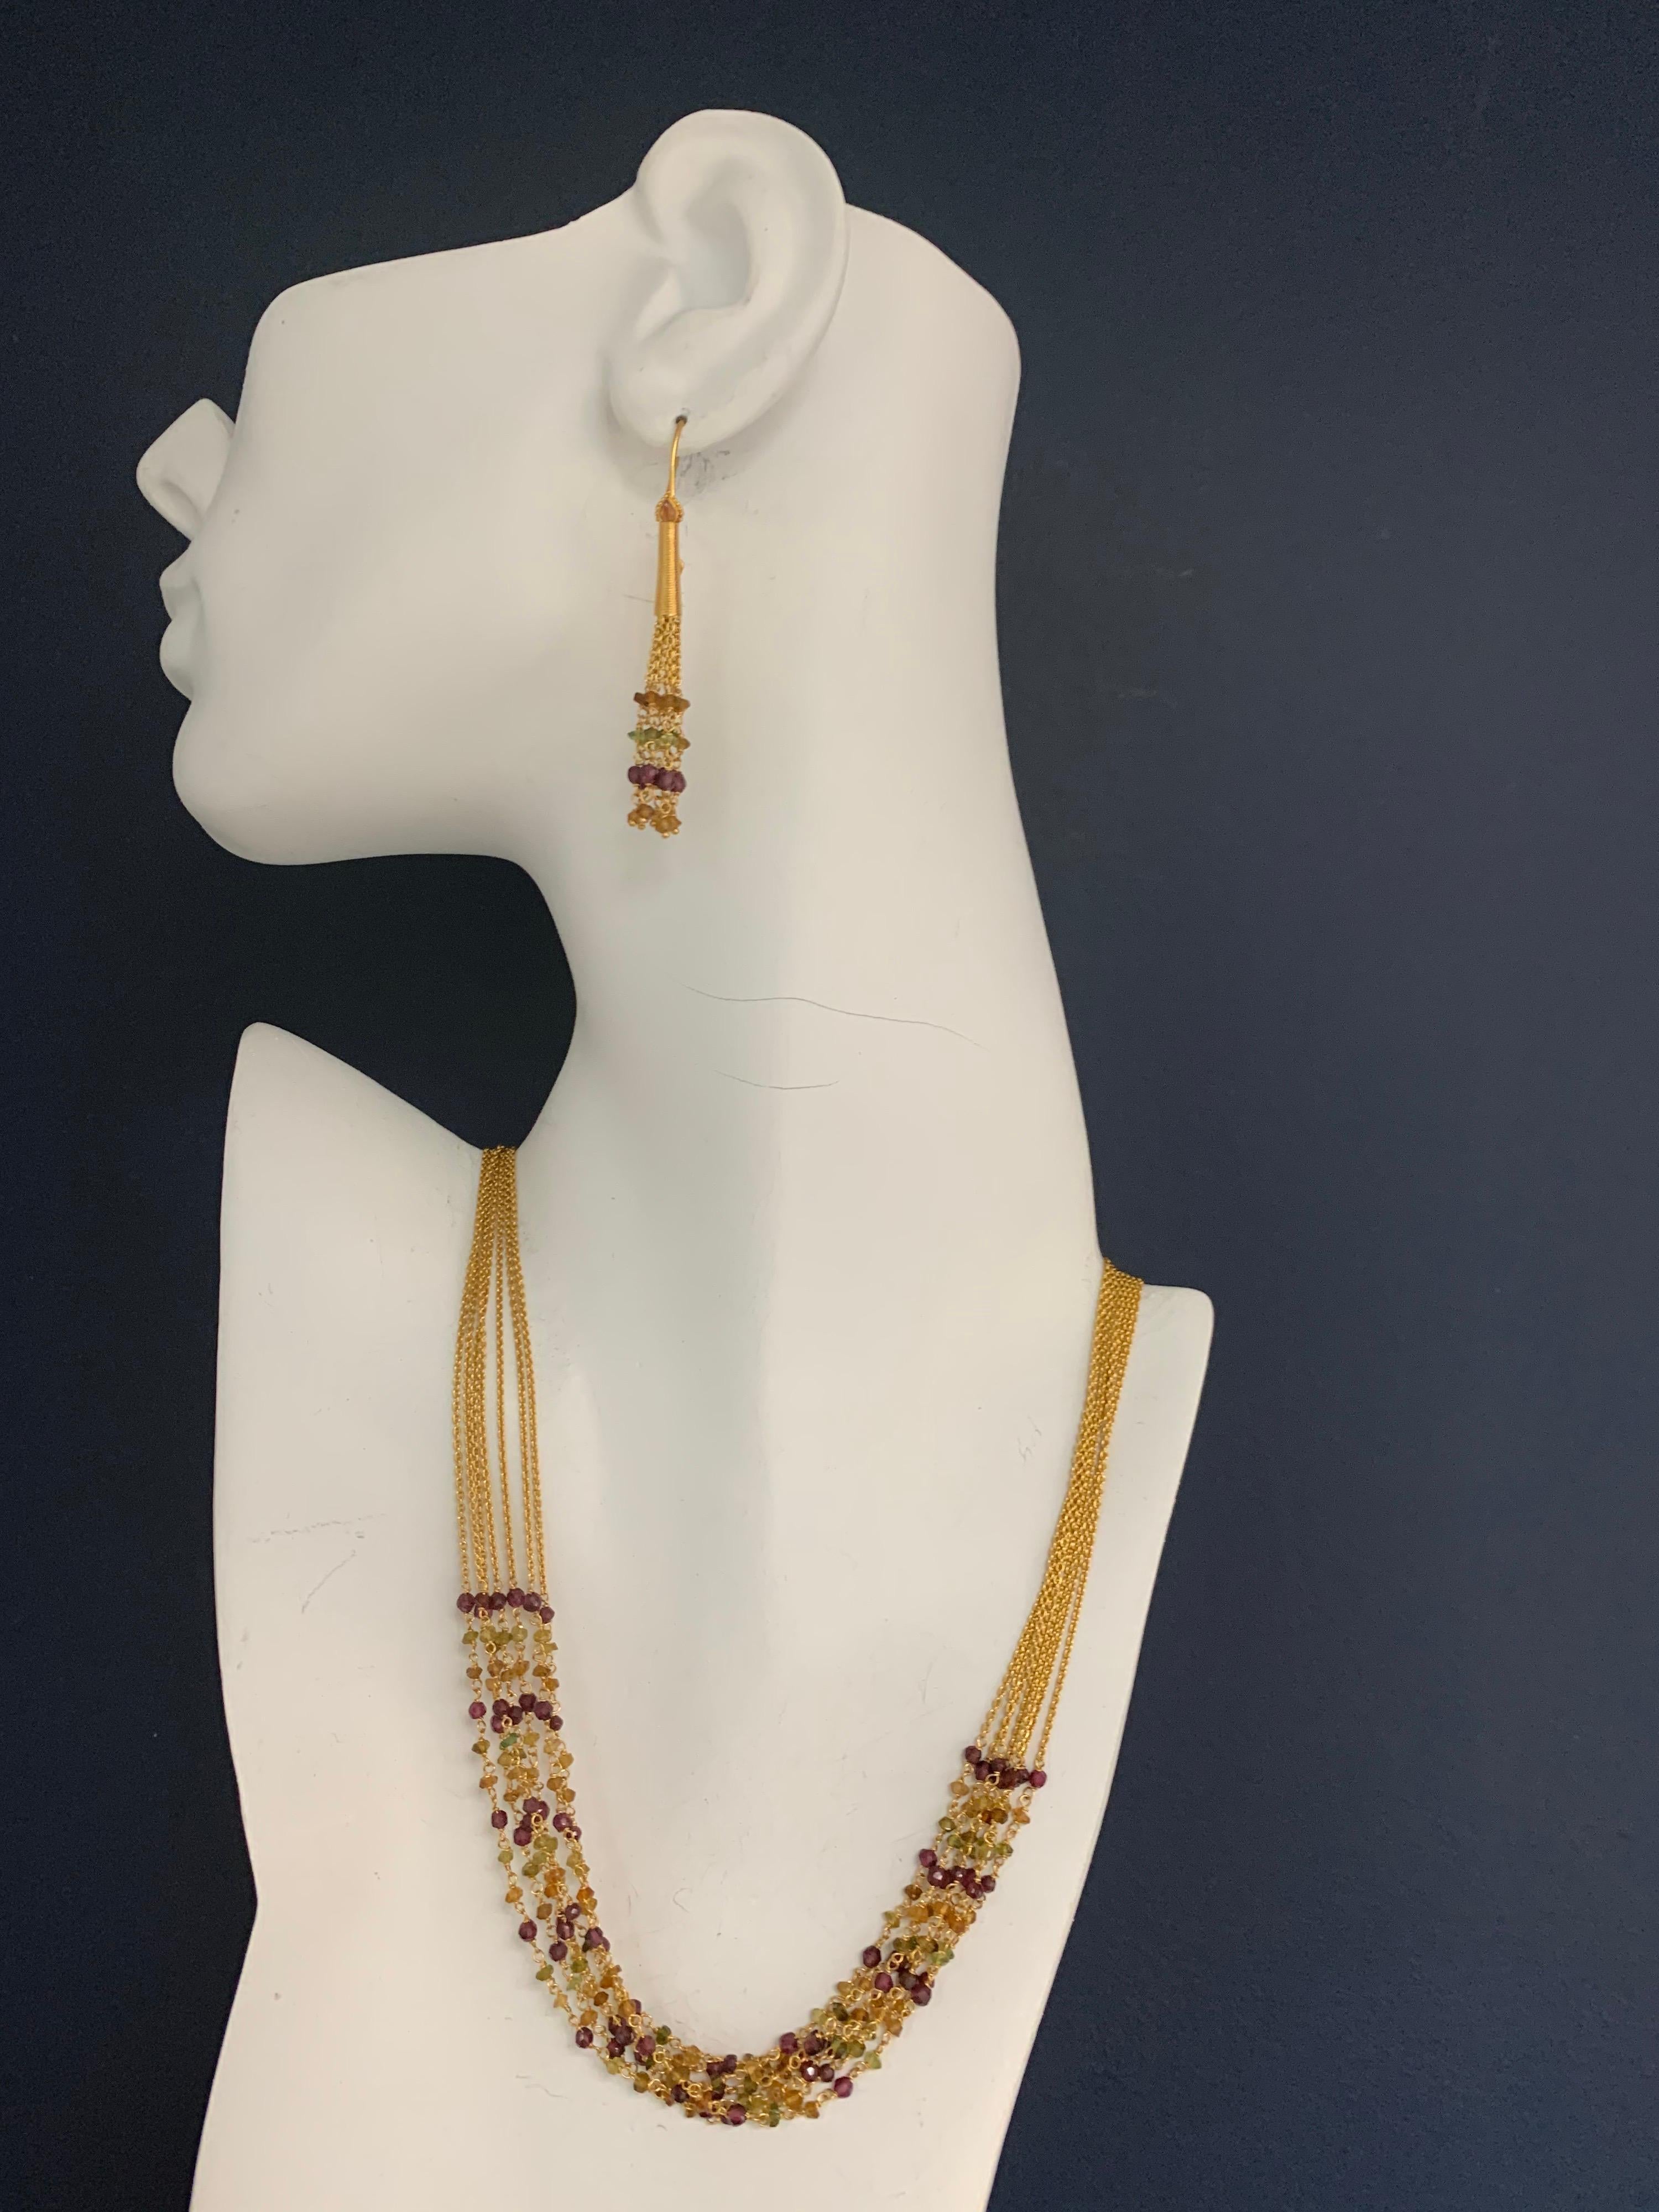 Modern Tanishq 22k Gold Necklace & Earring Set with Natural Colored Garnet. 

The necklace is 16